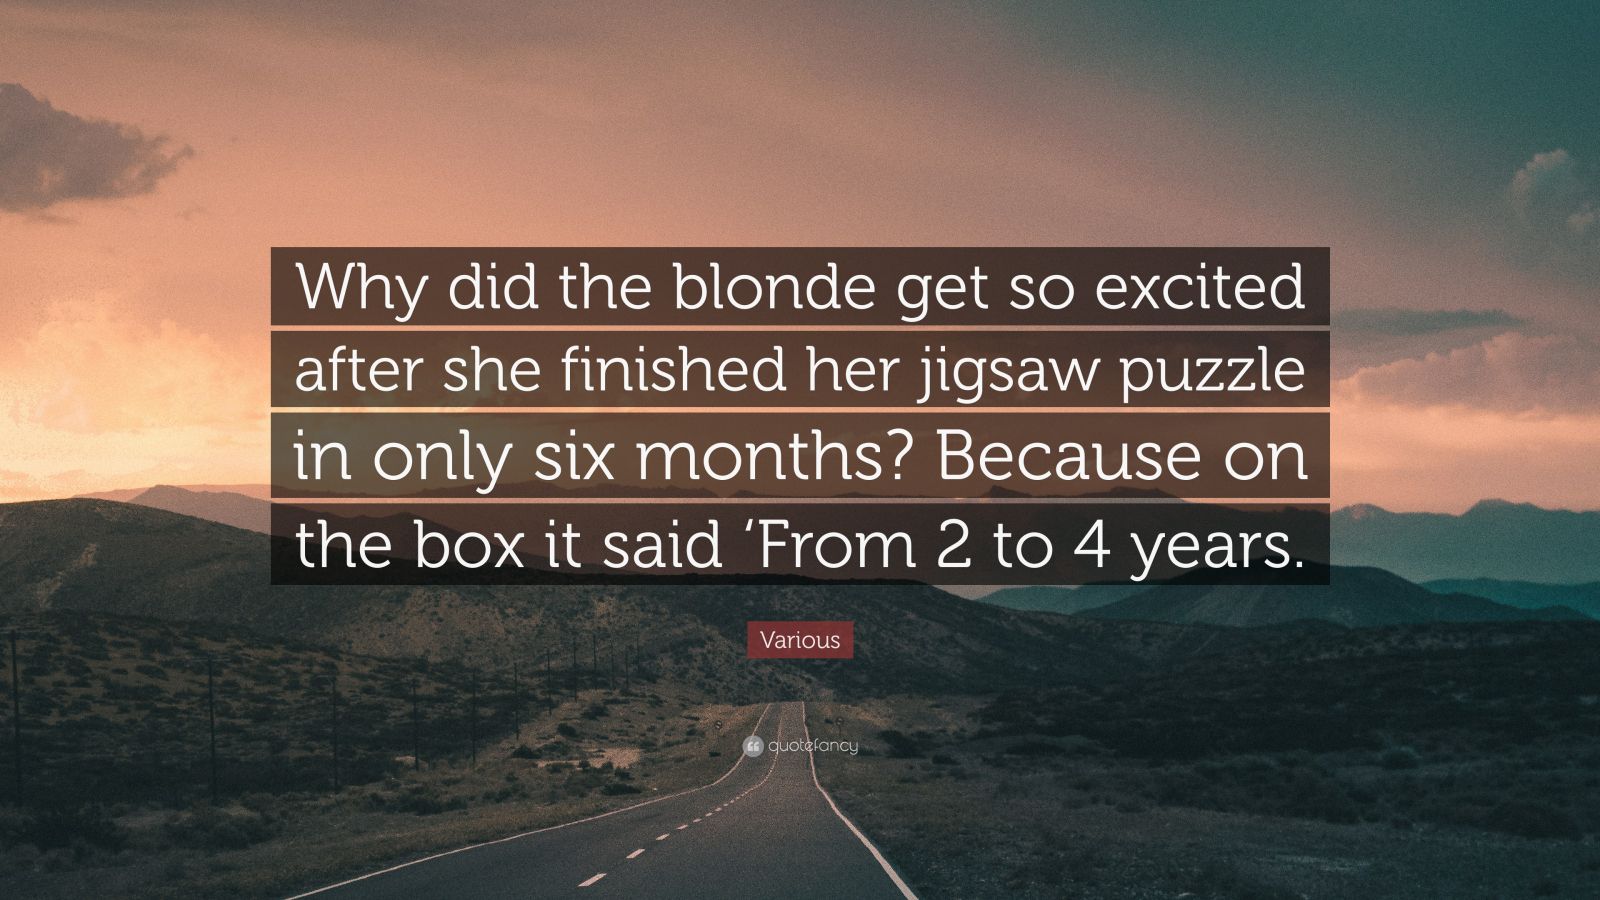 Why did the blonde get excited when she finished a puzzle in 6 months? - wide 5